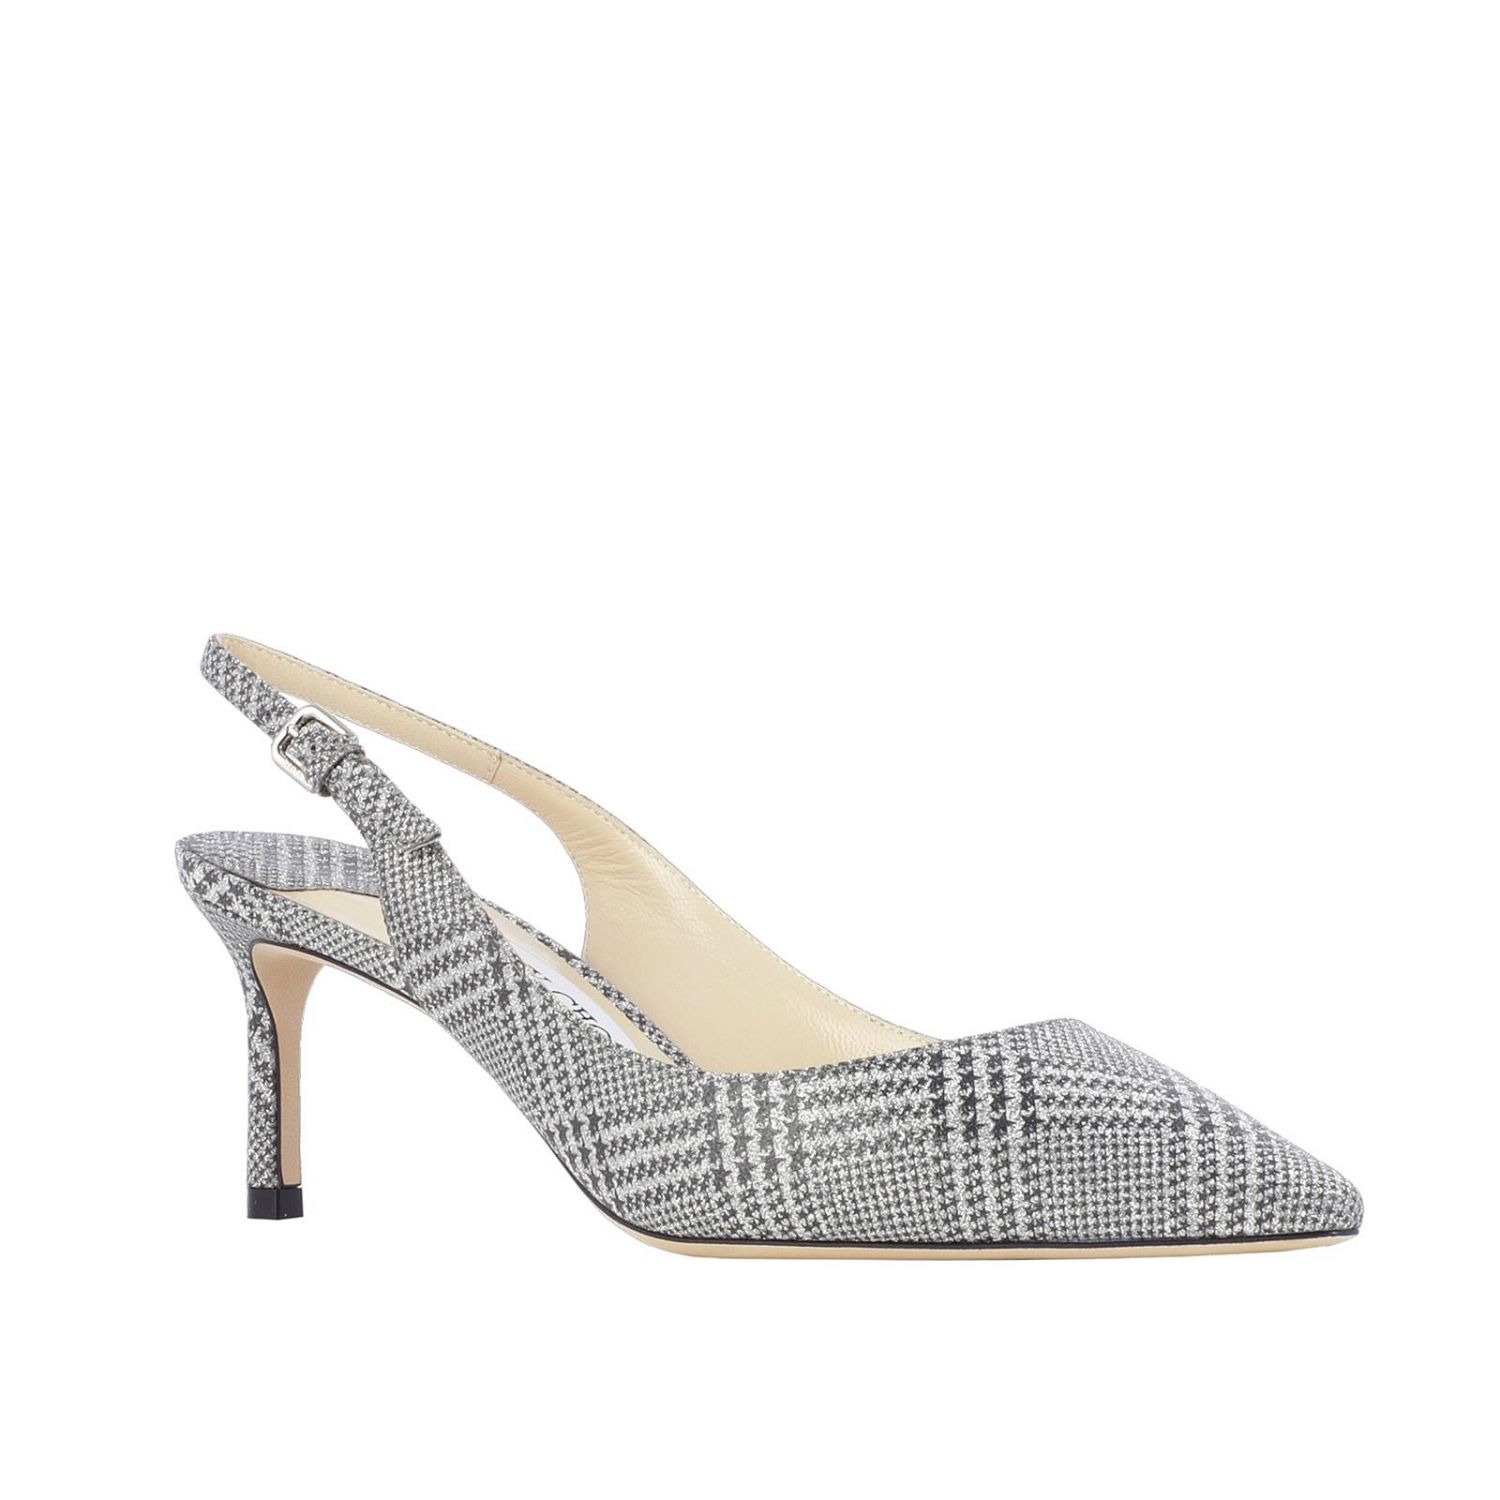 Jimmy Choo Outlet: Erin pointed sandal in houndstooth patterned fabric ...